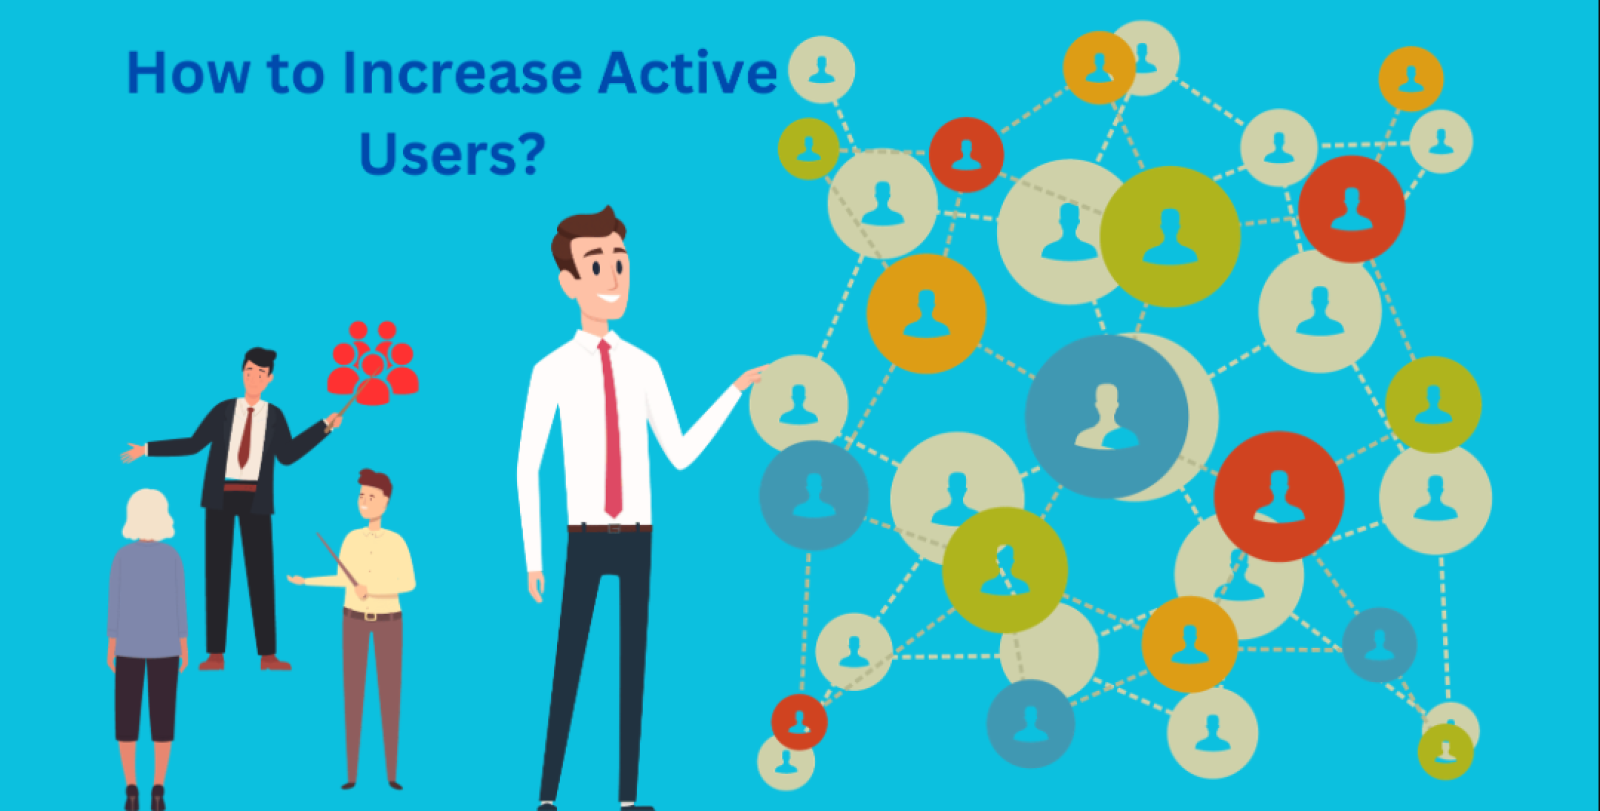 What are active app users, and how can they be increased?